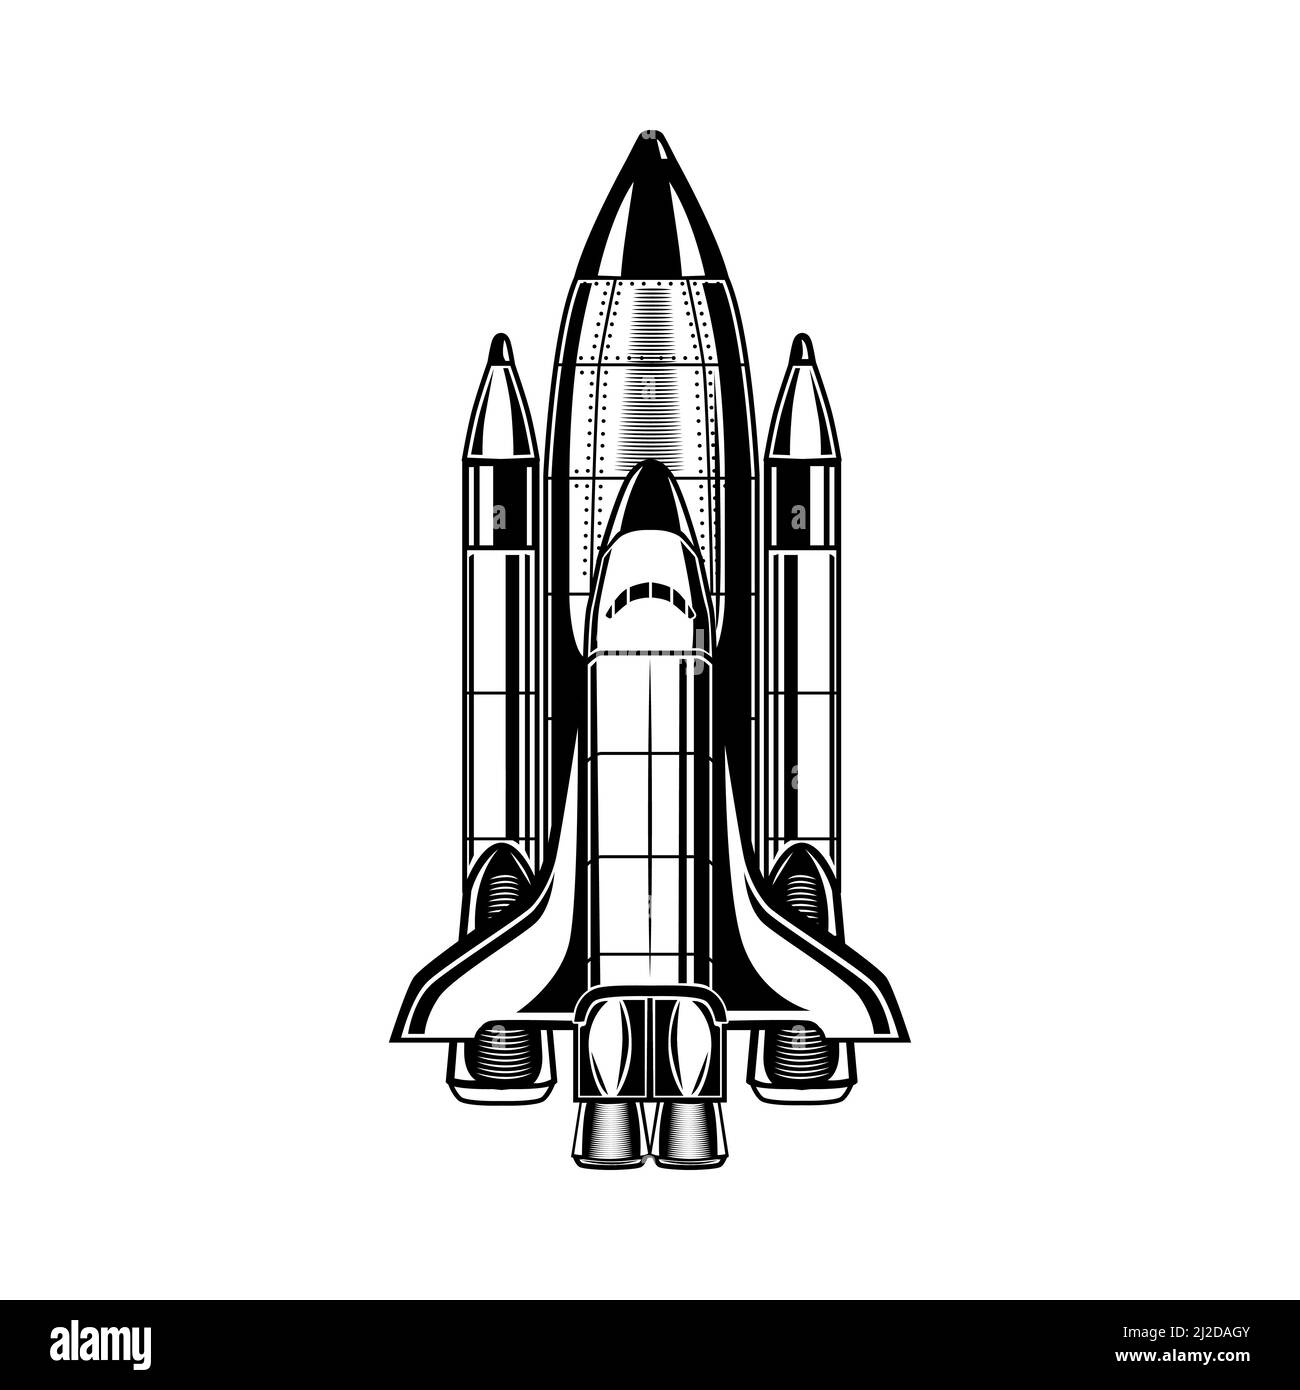 Monochrome flying rocket vector illustration. Vintage spacecraft for promotional label. Galaxy and cosmos exploration concept can be used for retro te Stock Vector